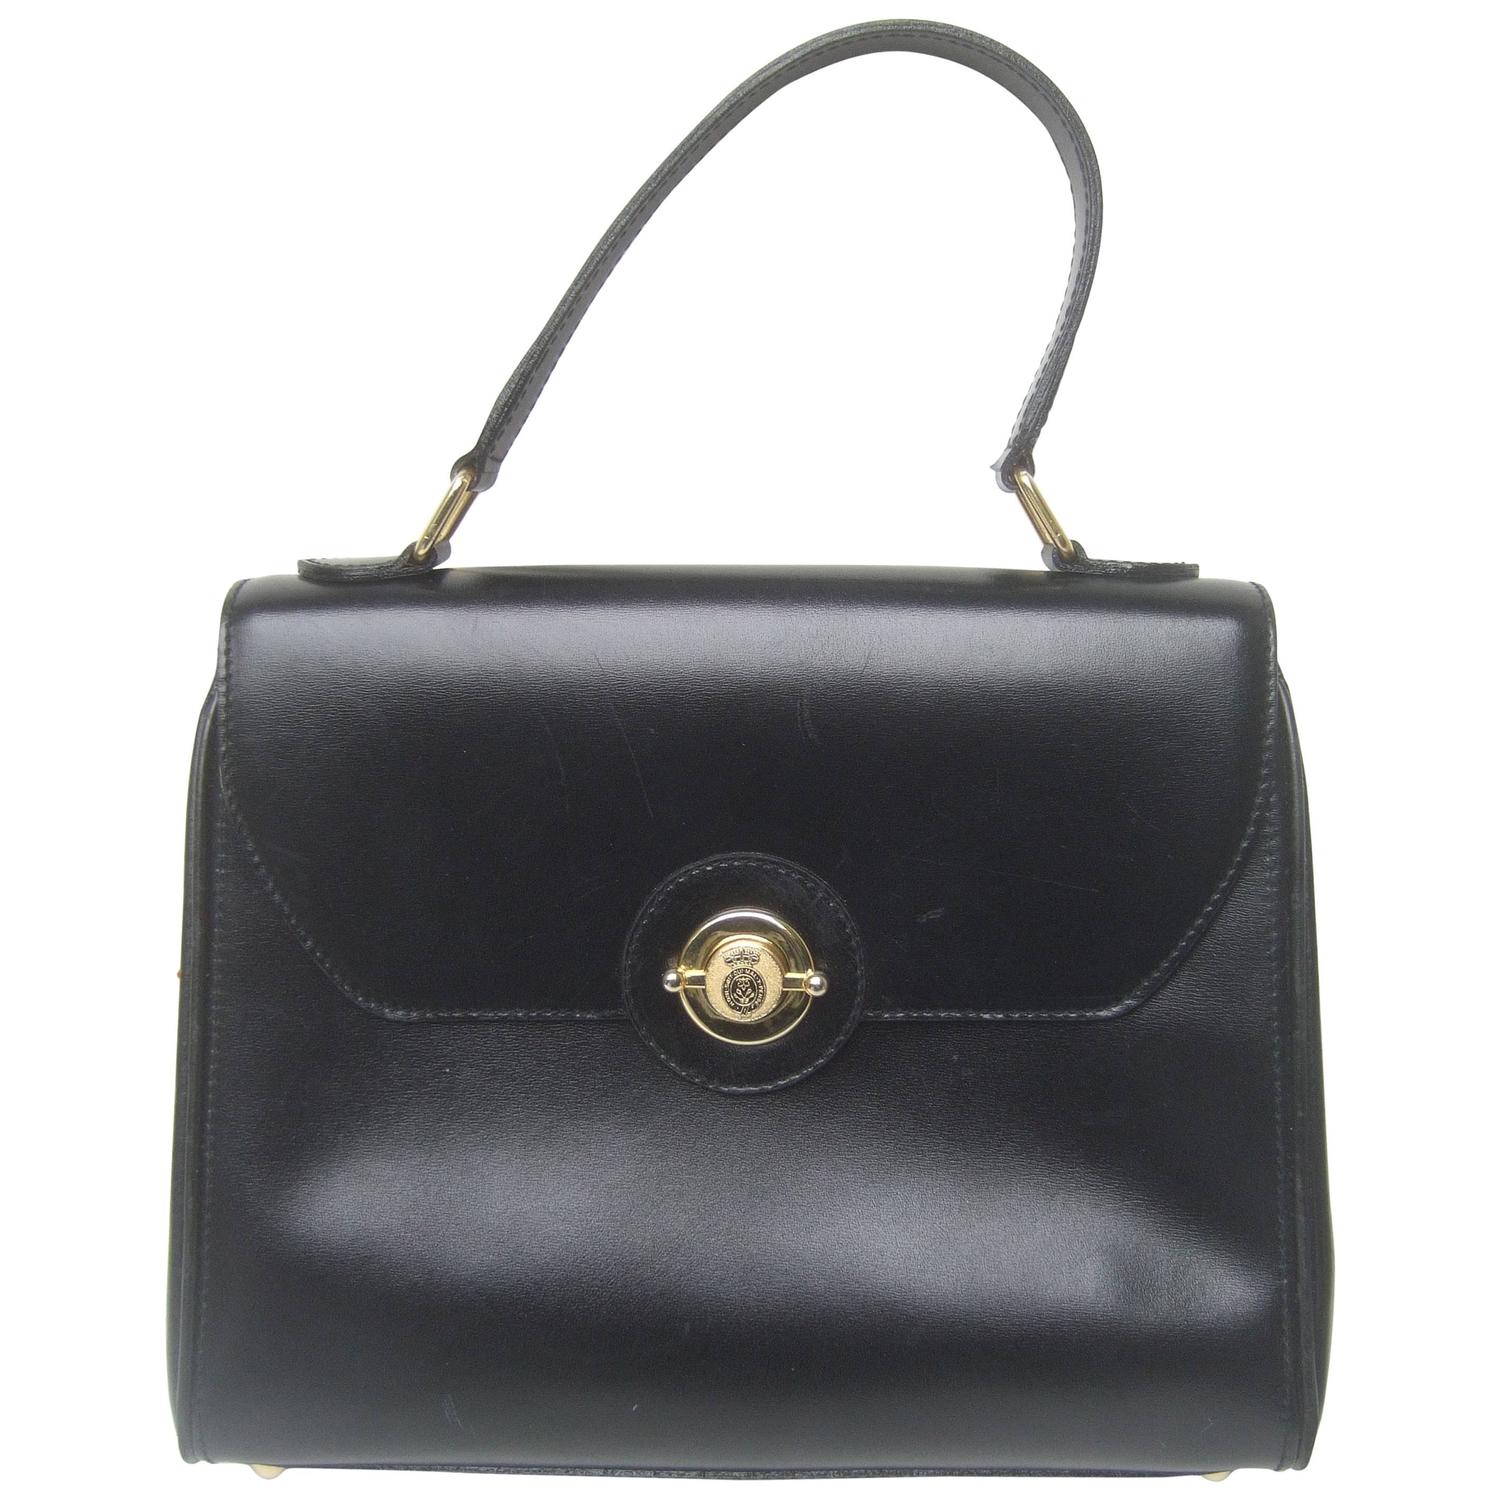 Saks Fifth Avenue Ebony Leather Handbag Made in Italy For Sale at 1stdibs